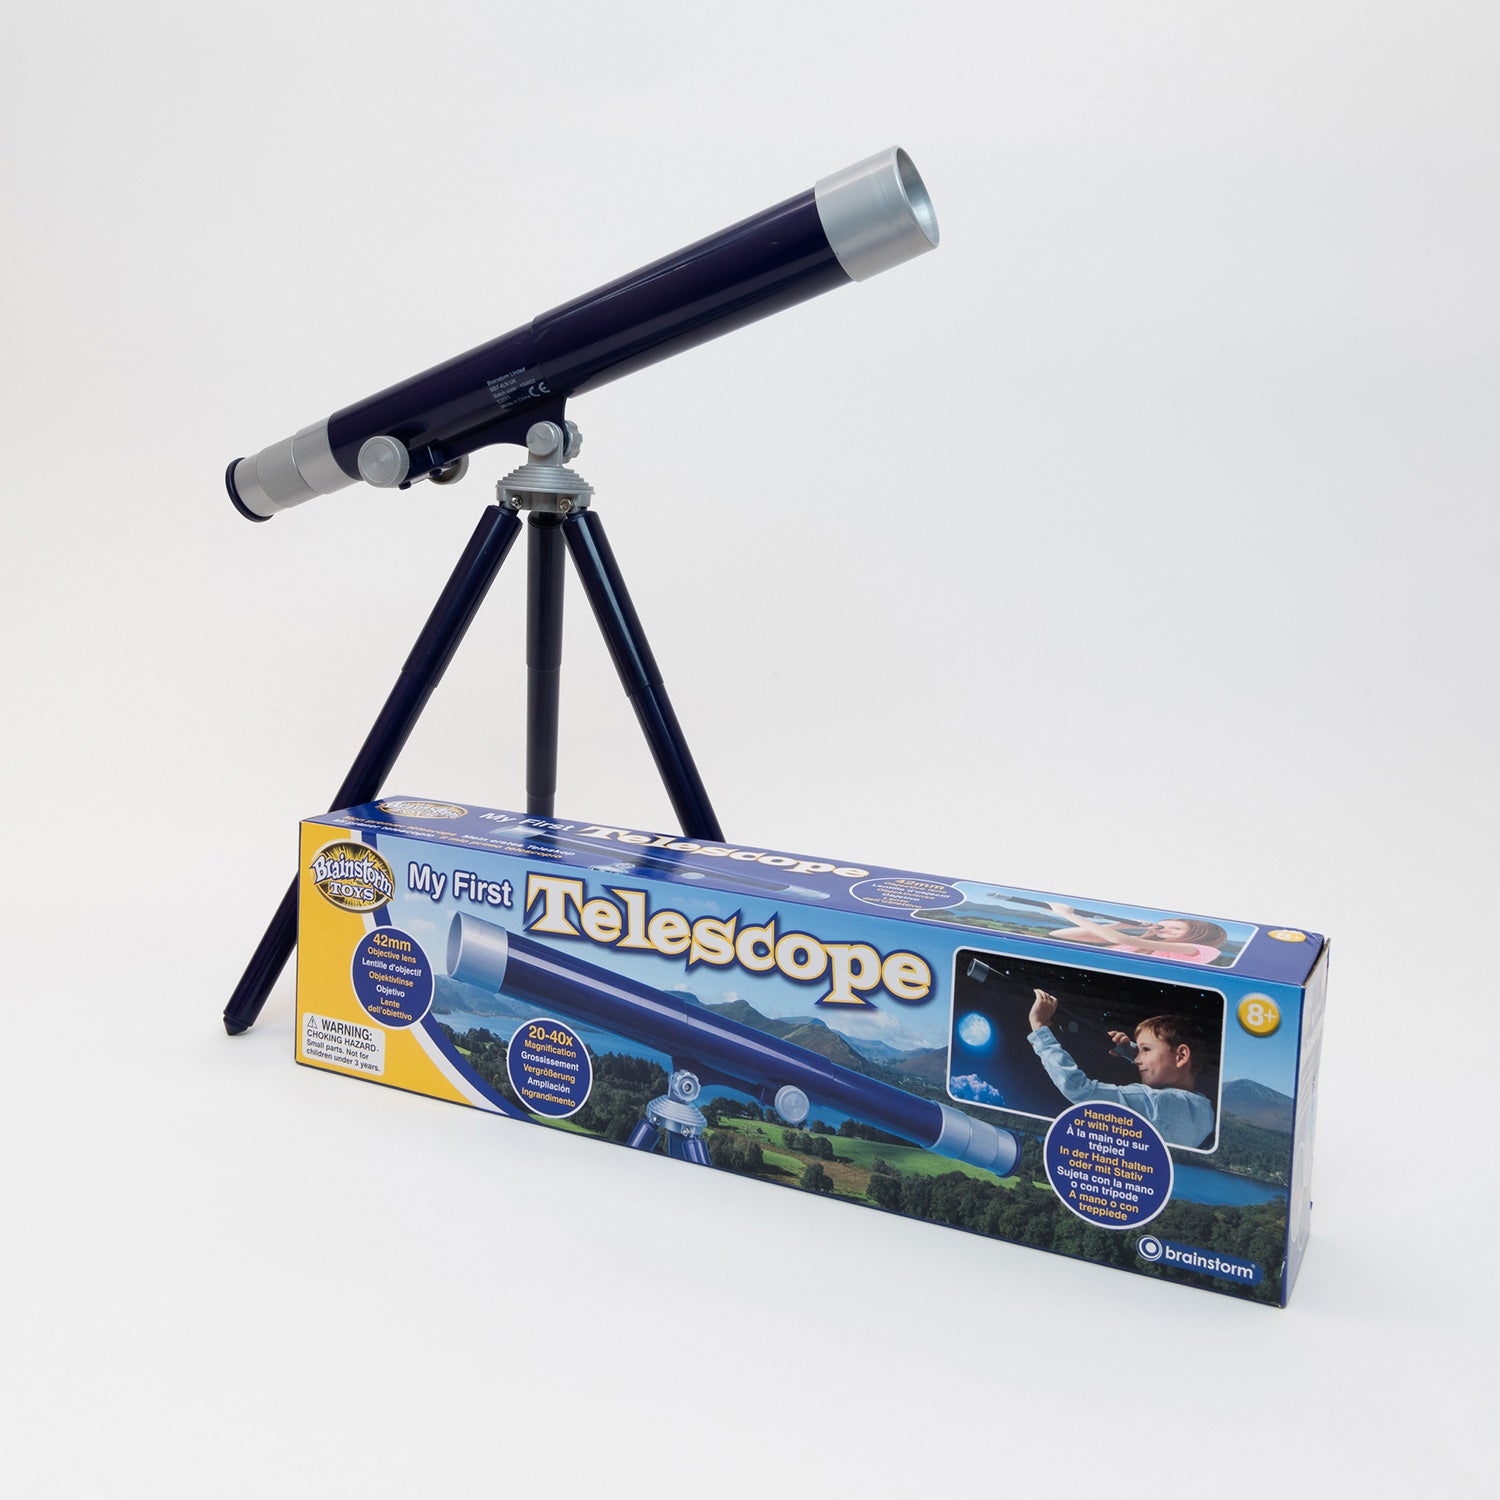 A blue telescope on a stand behind the My First Telescope box.